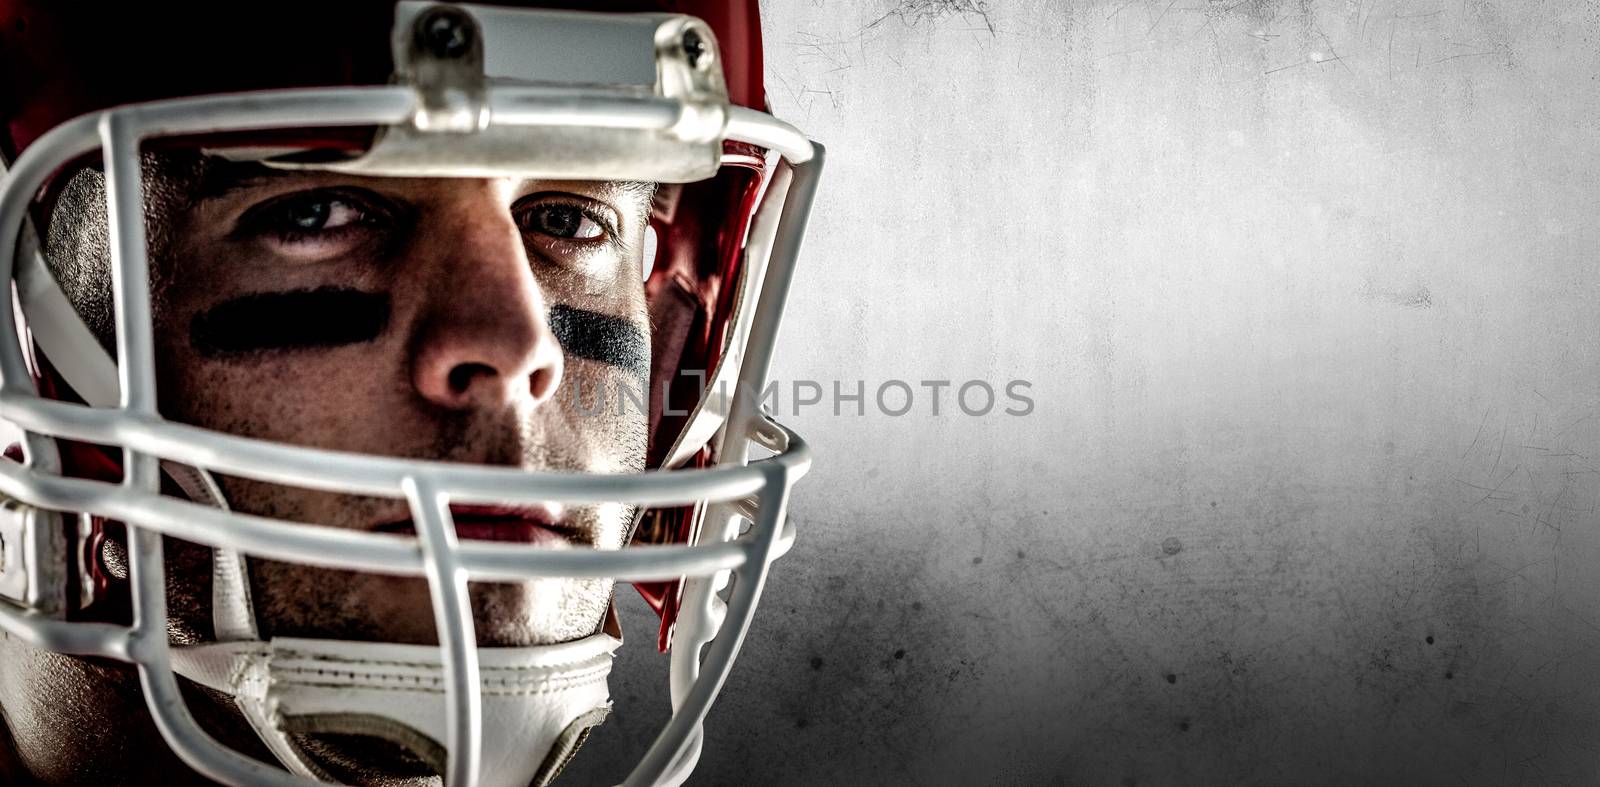 American football player looking at camera against grey background